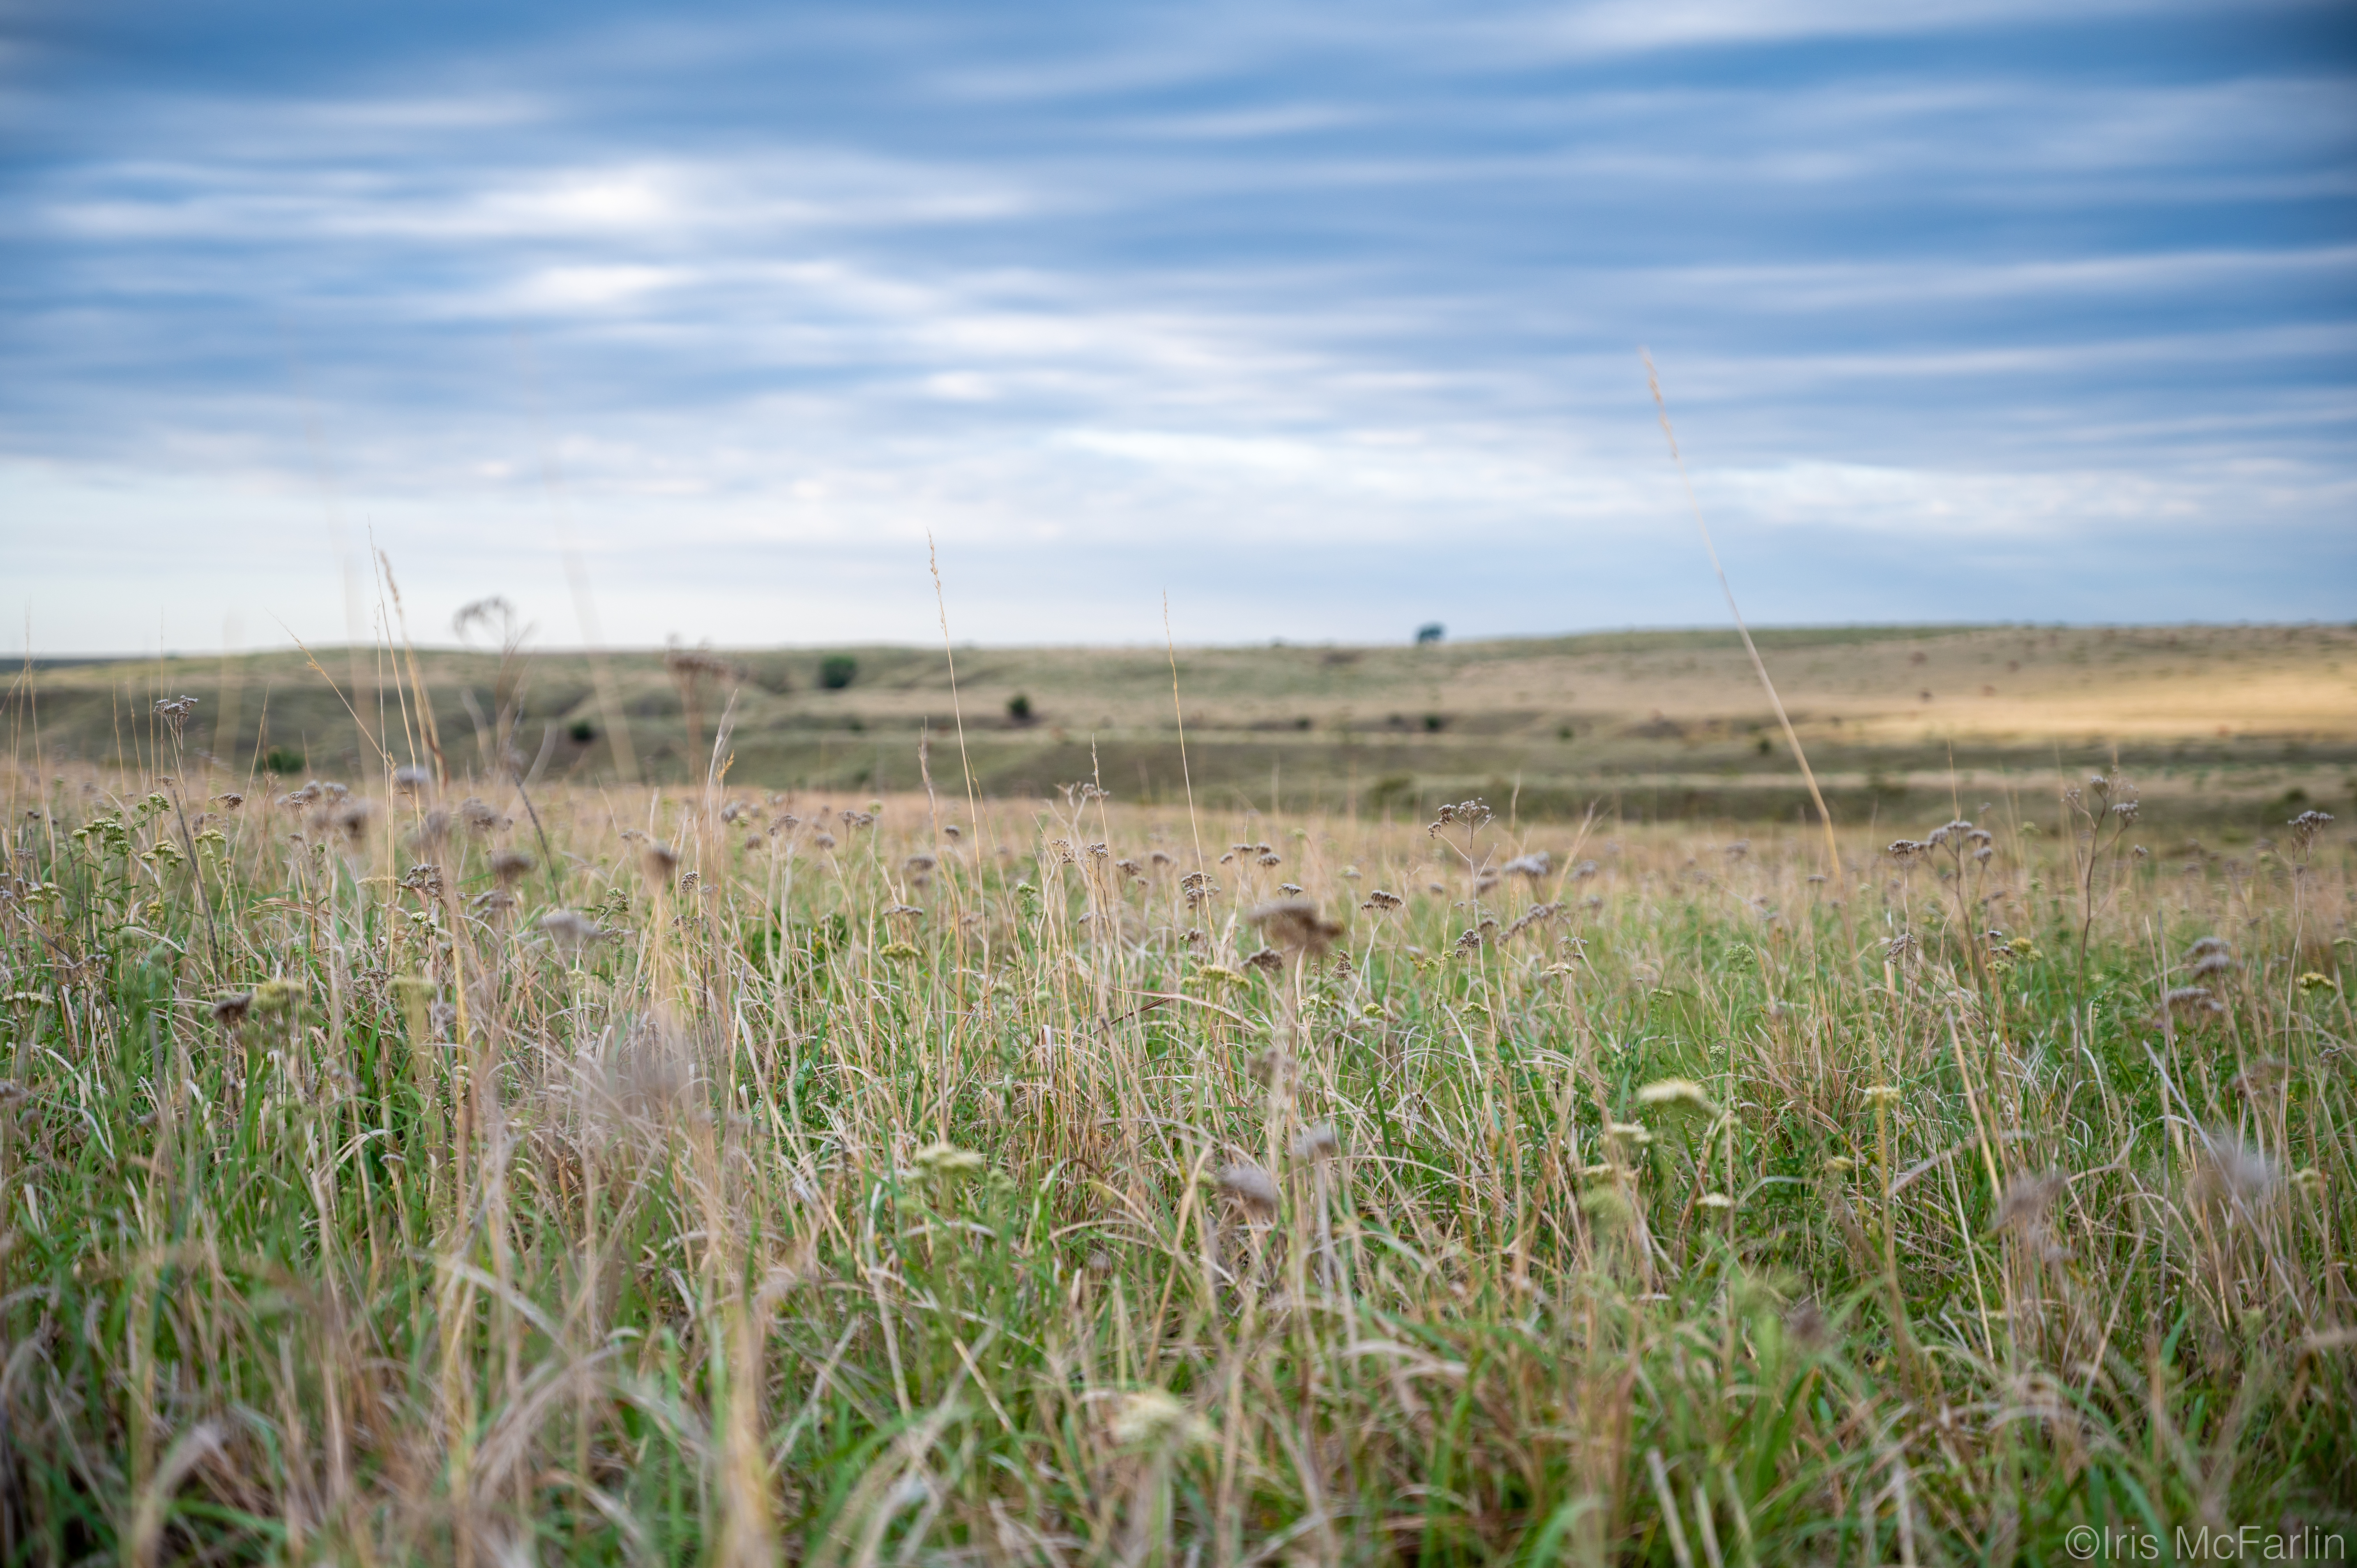 A field full of grasses and forbs stretches out under a cloudy sky